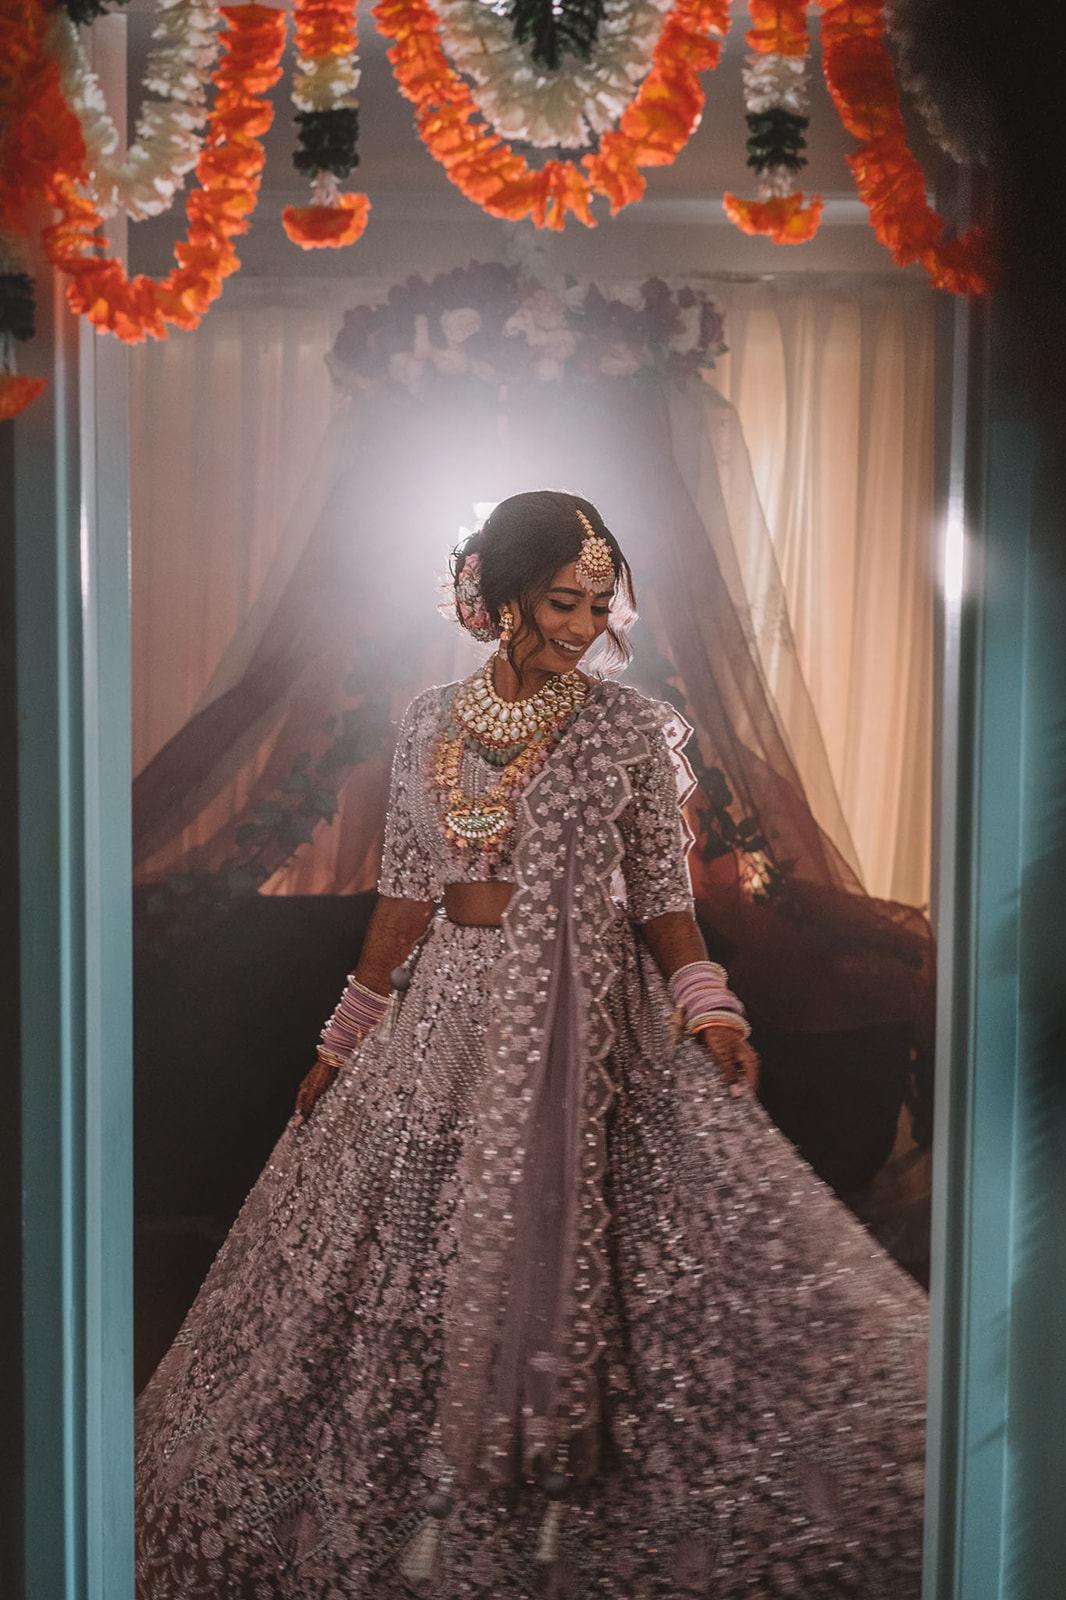 Indian Wedding Photography at Eden Venues